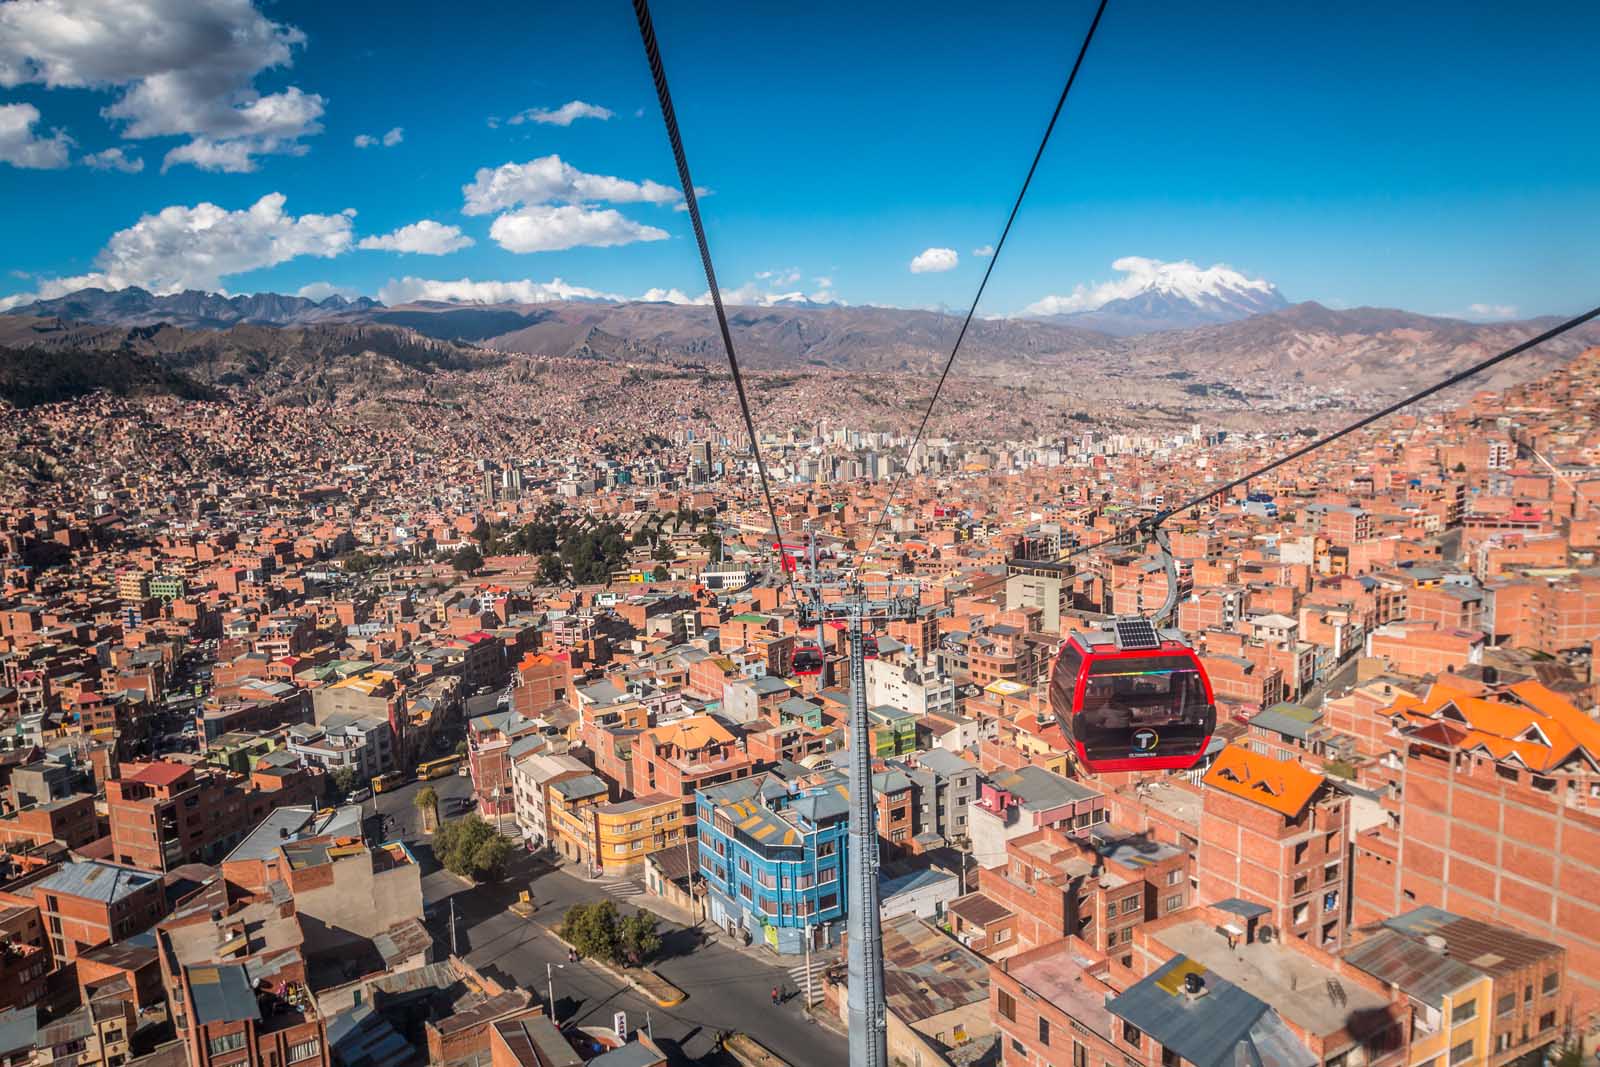 Facts About Bolivia The two capitals of Bolivia, La Paz and Sucre